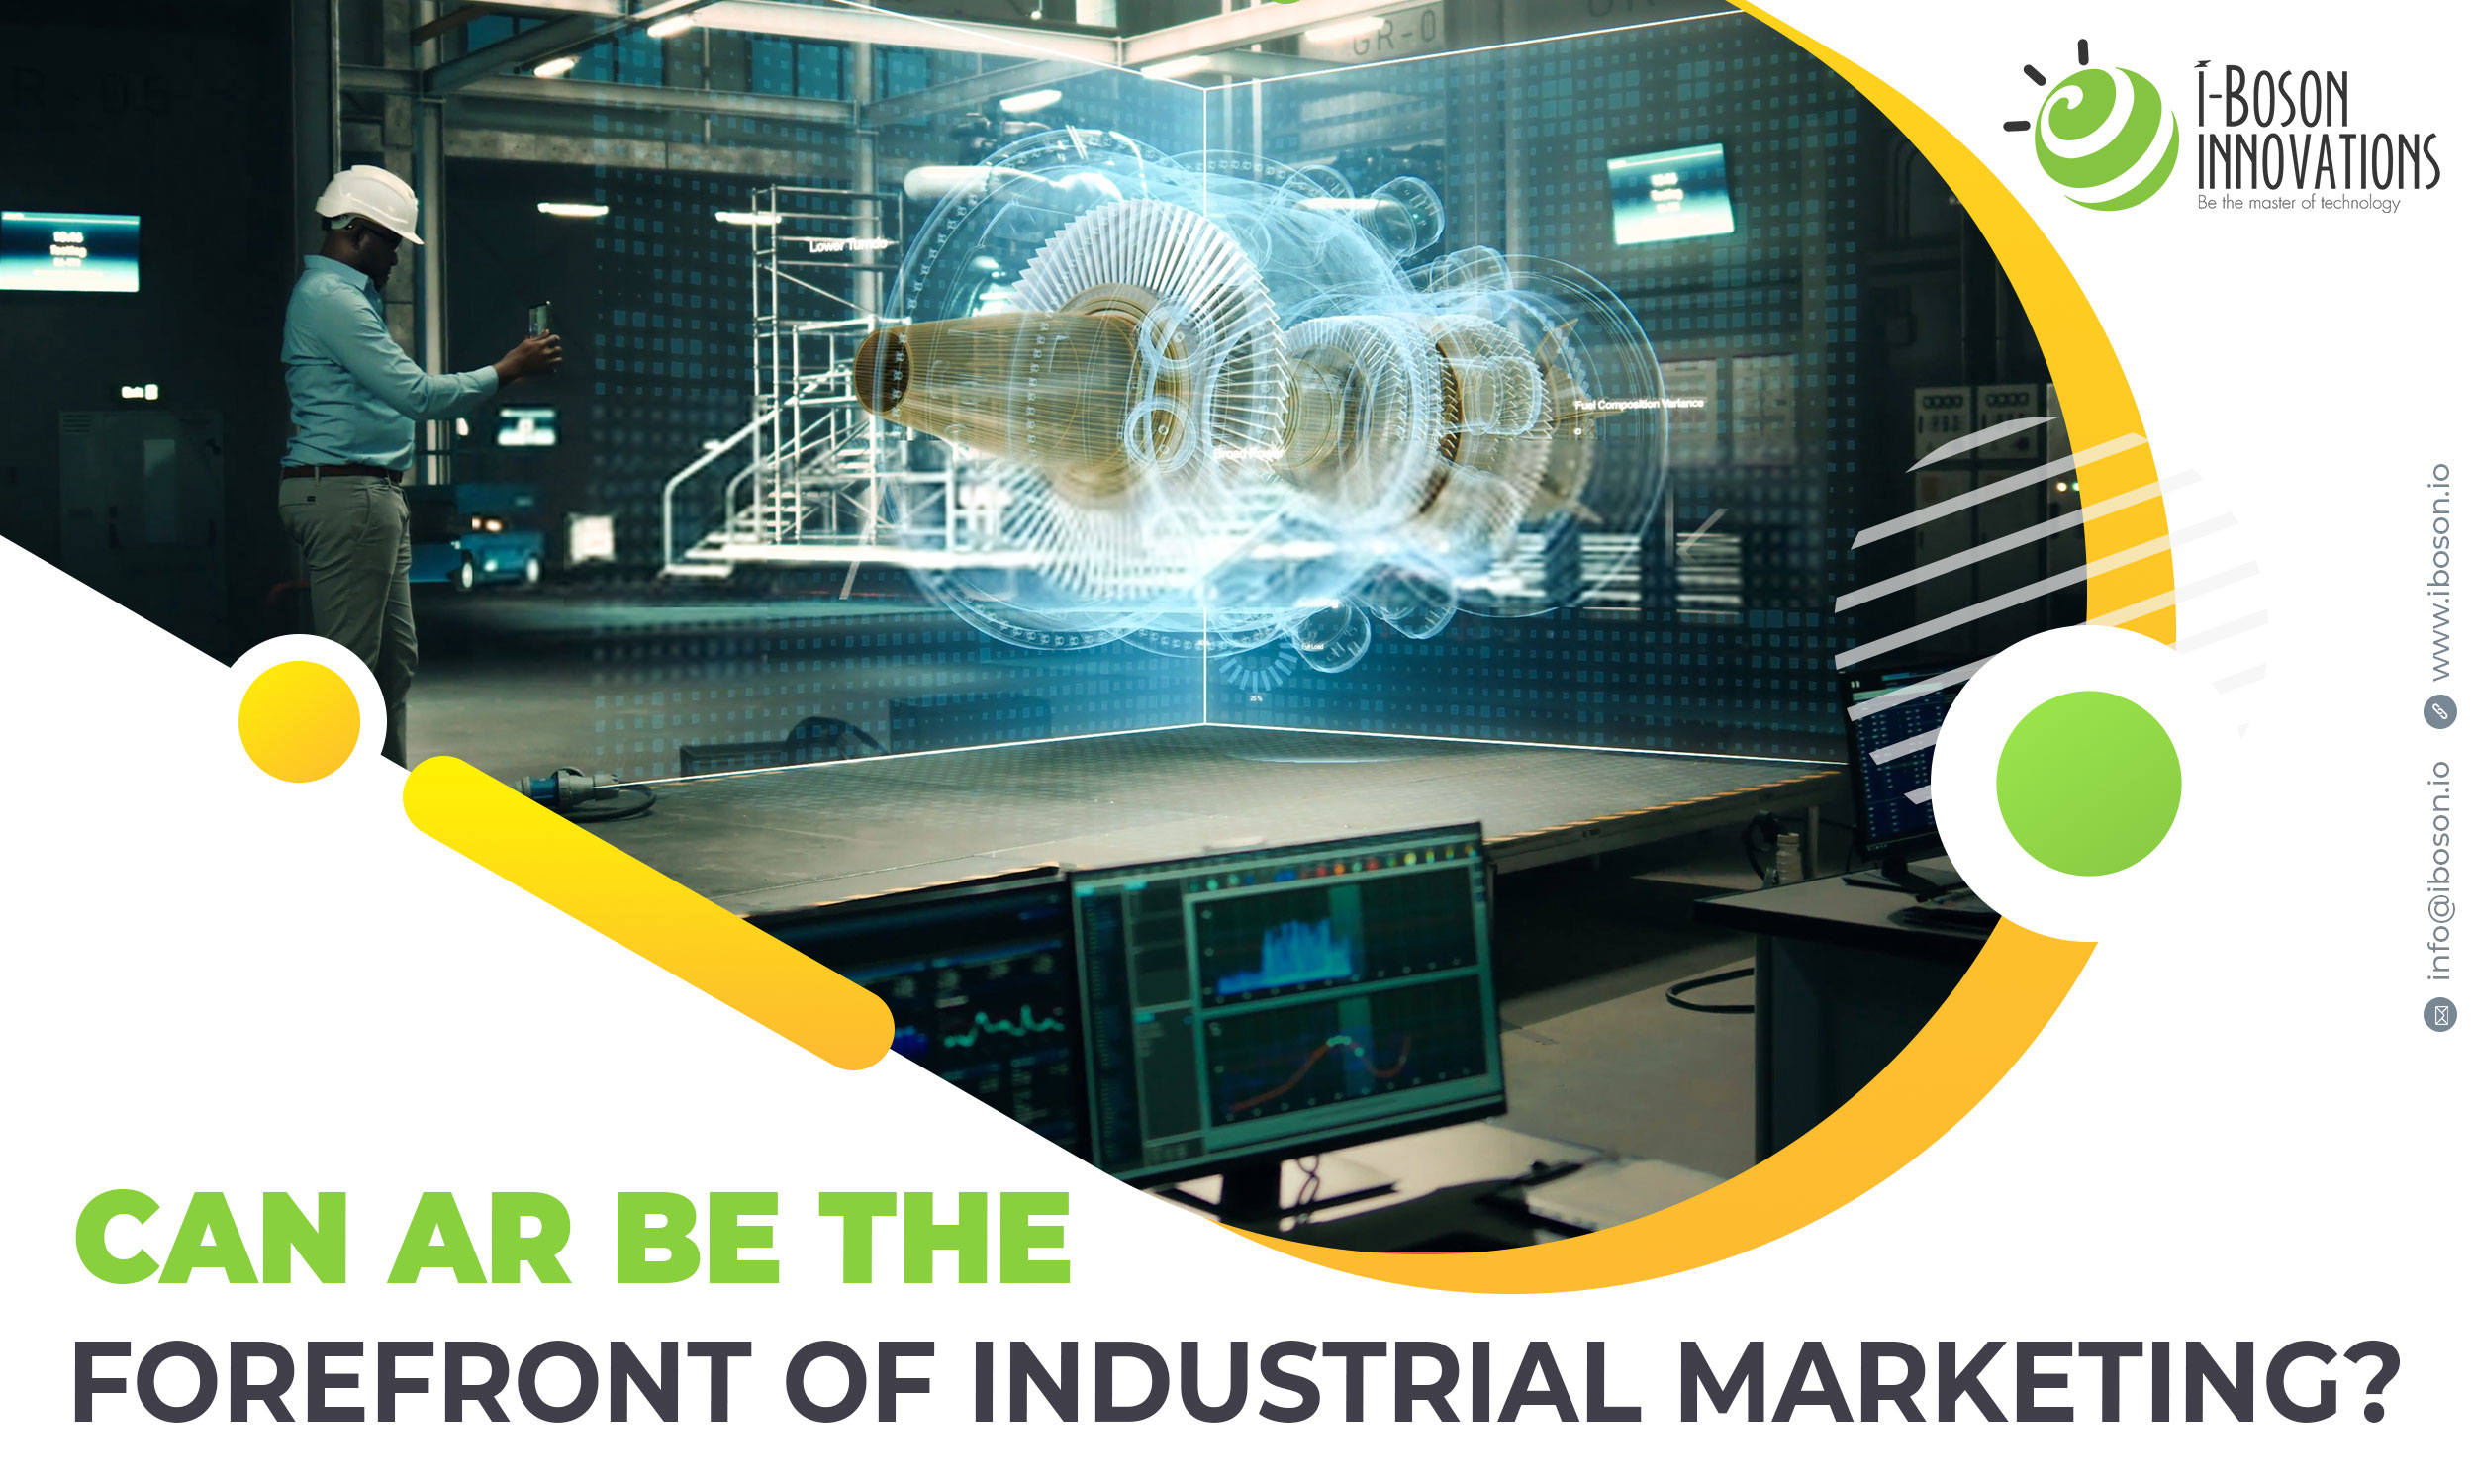 Augmented reality is the forefront of industrial marketing
                        